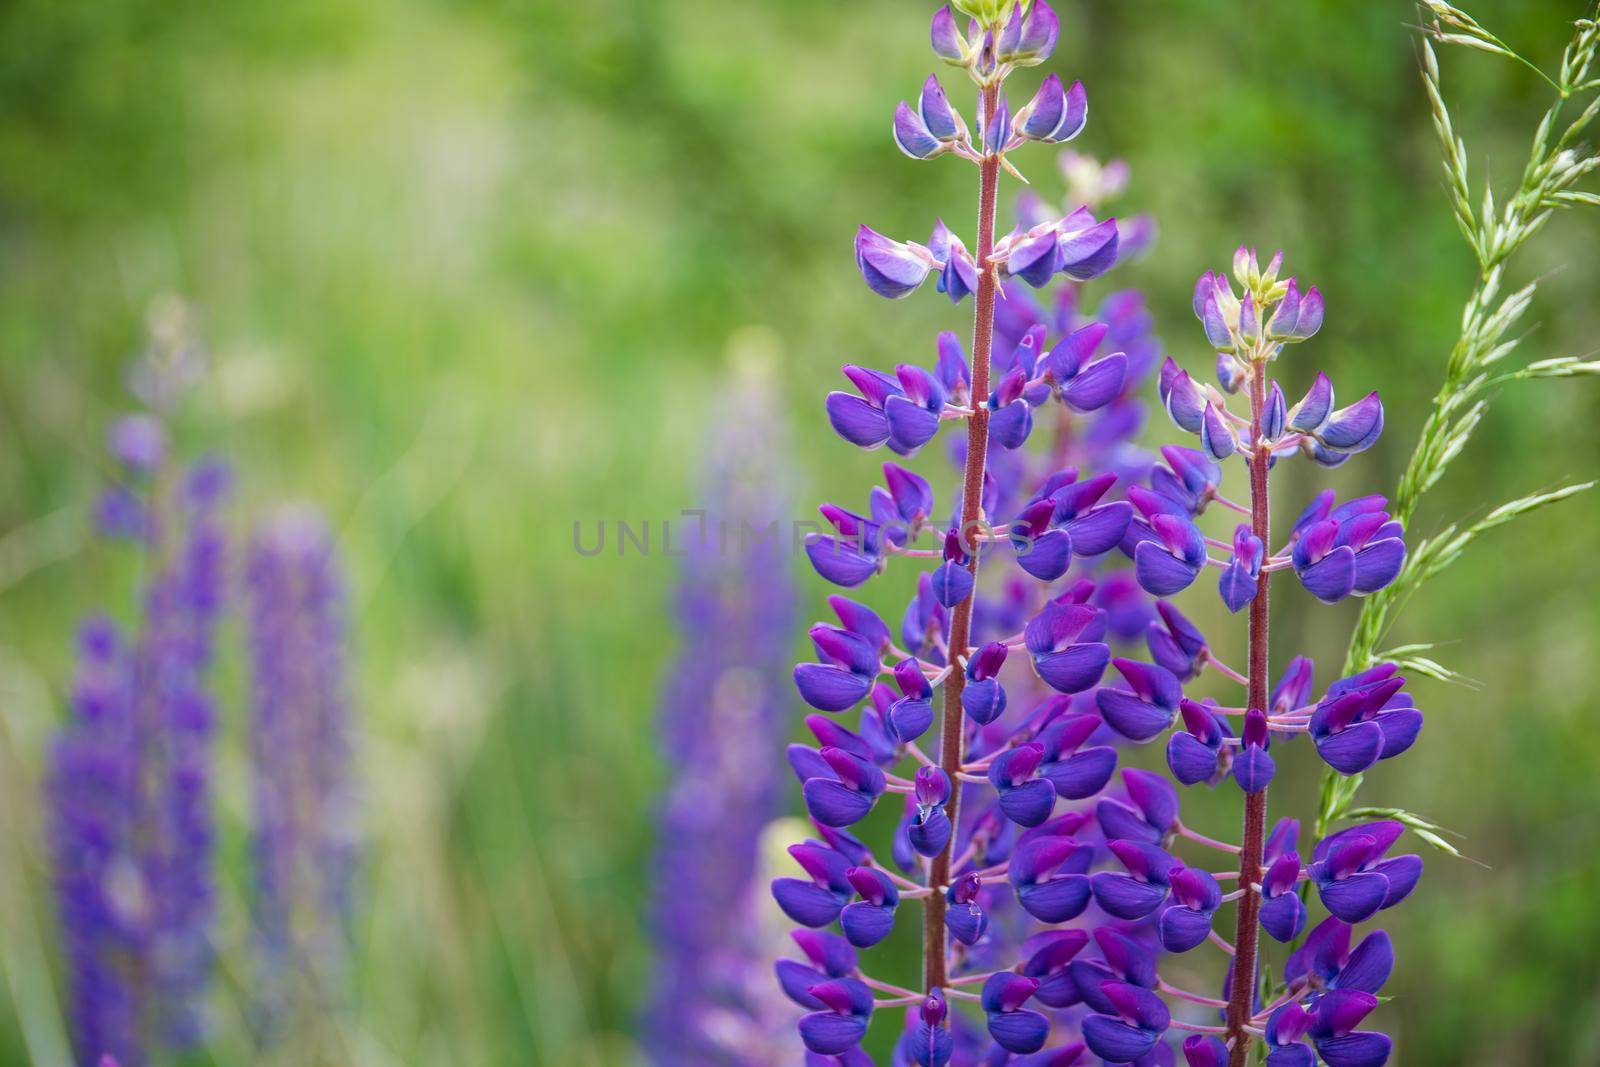 Lupines in bloom